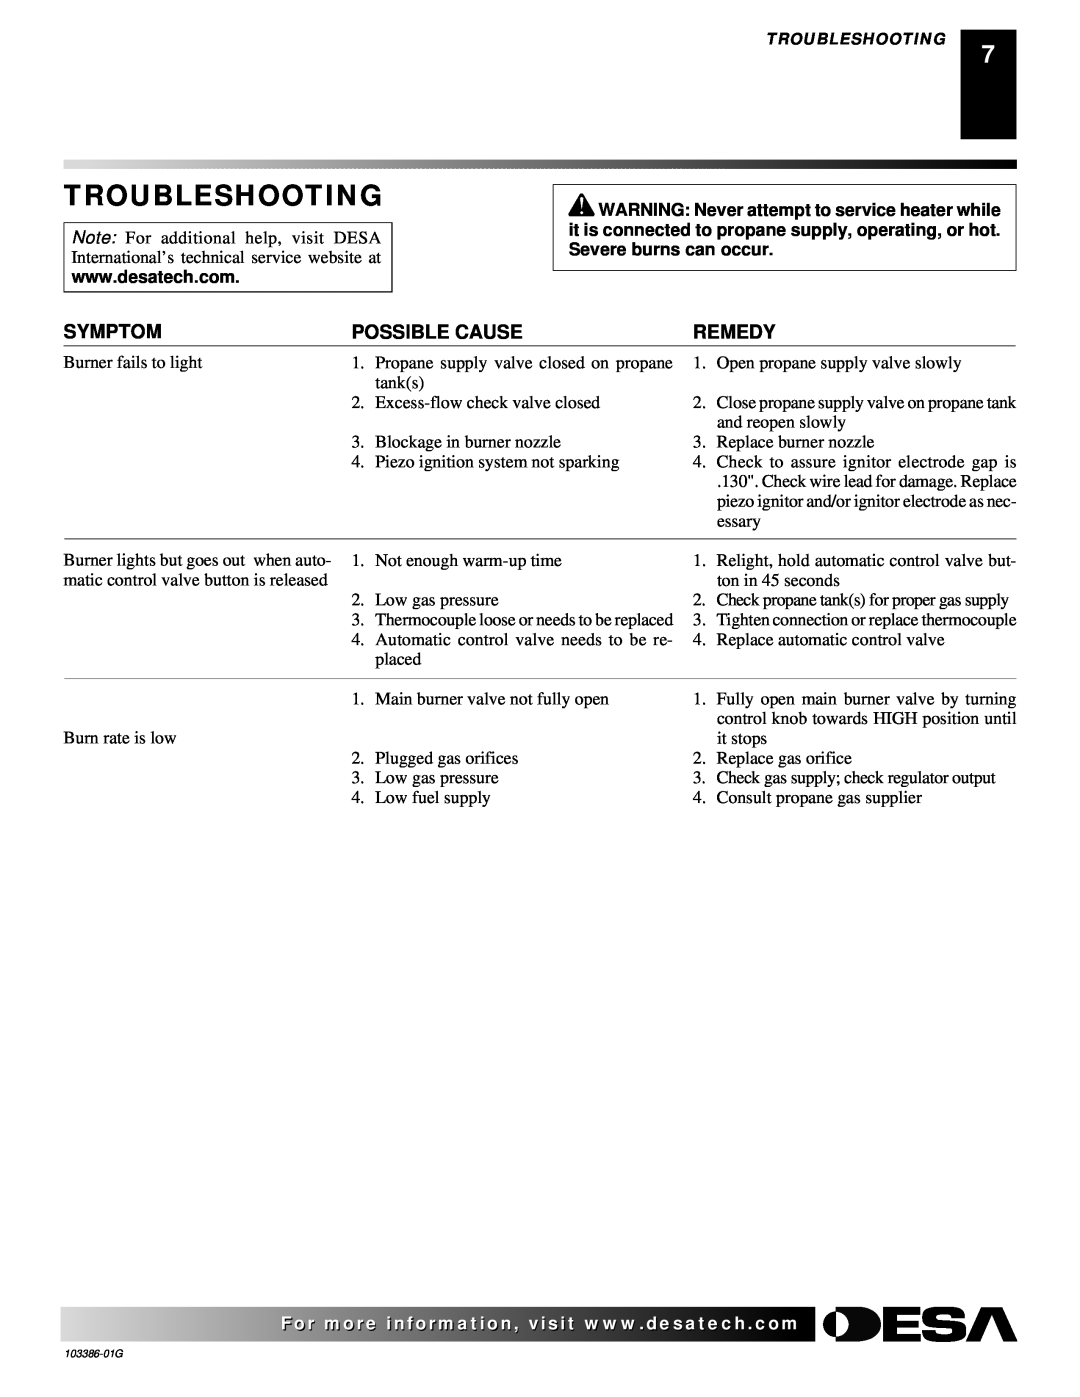 Desa 200 owner manual Troubleshooting, Symptom, Possible Cause, Remedy 